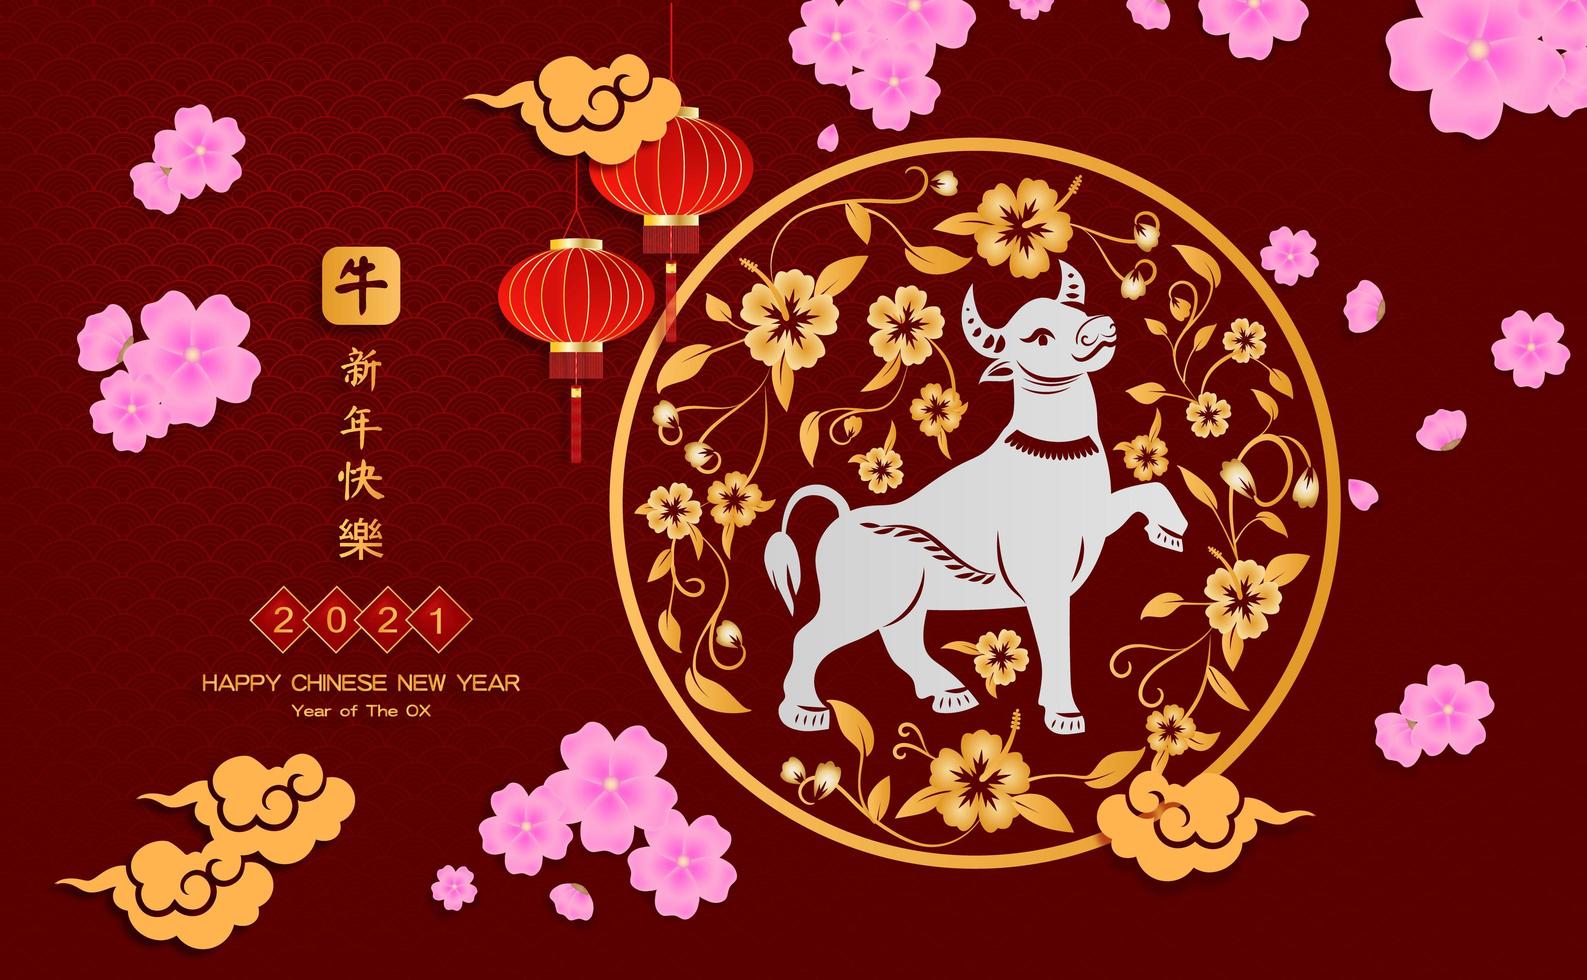 Chinese new year 2021 year of the ox , red paper cut ox character,flower and asian elements with craft style on background. vector